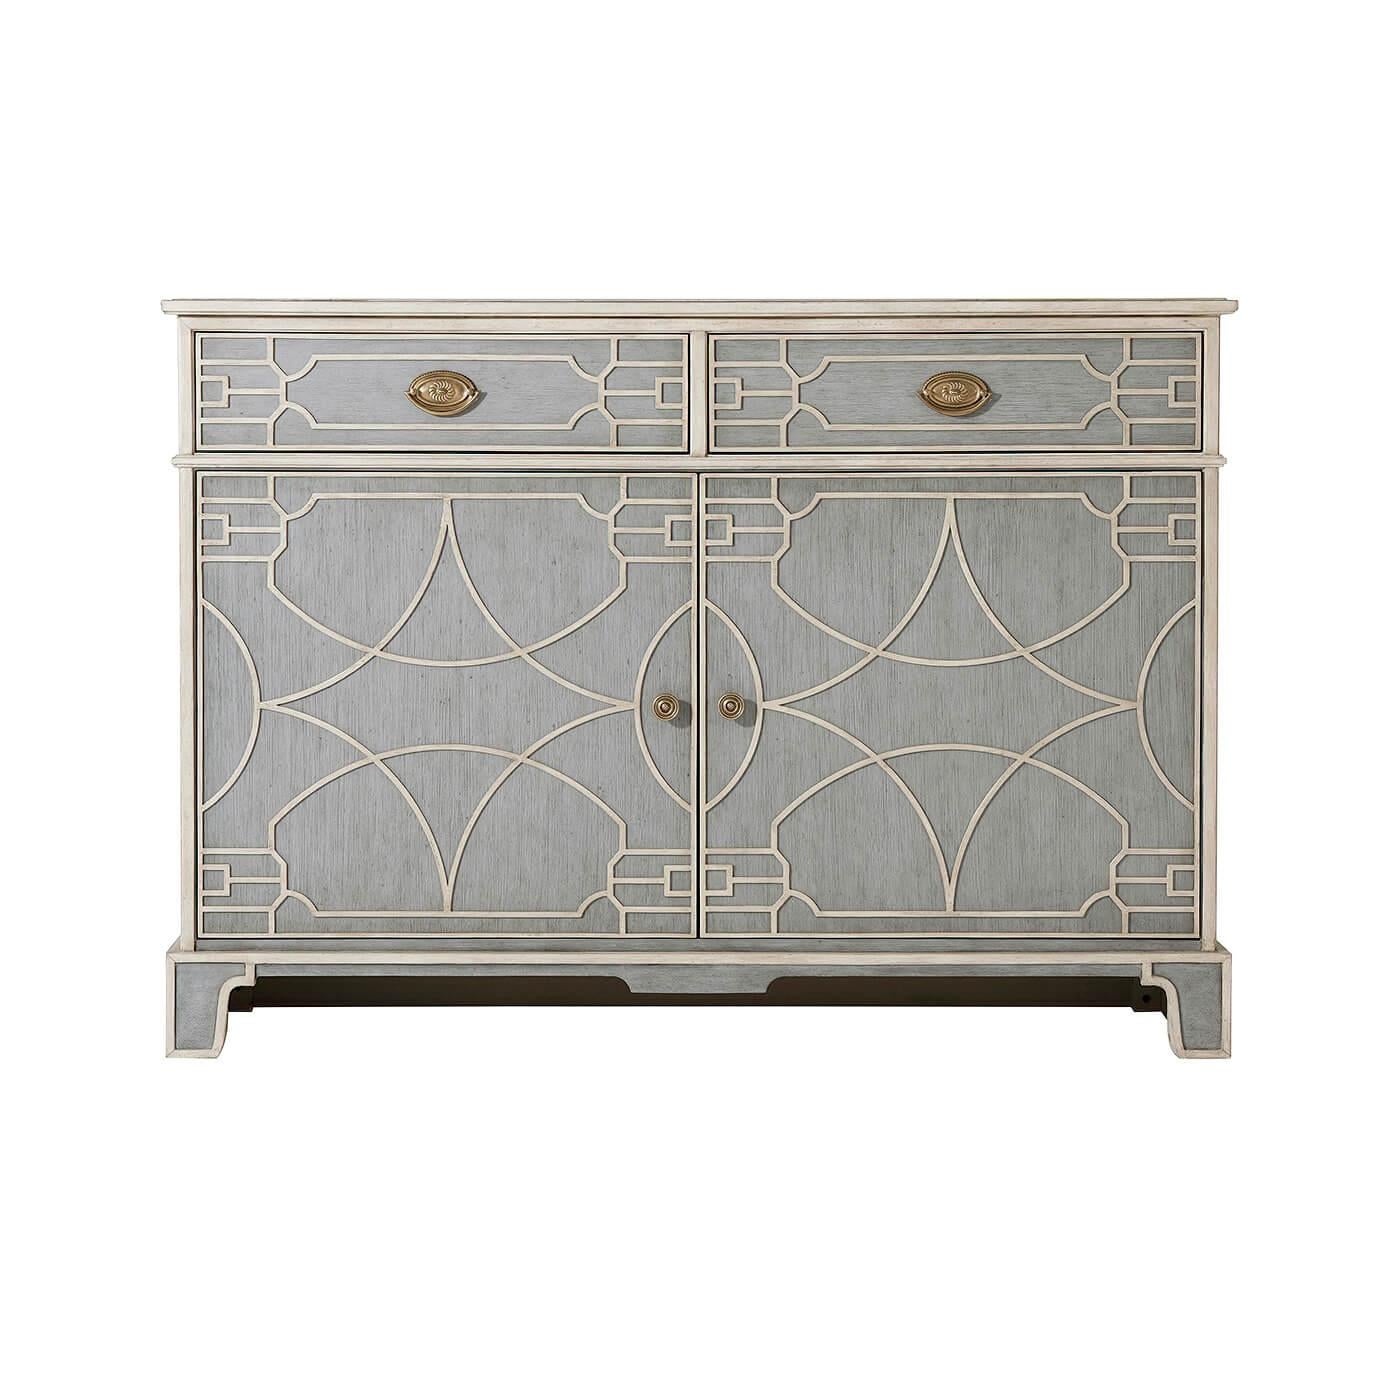 A hand-painted Chinese Chippendale style side cabinet with two blind fret carved frieze drawers with brass pull handles above two cabinet doors enclosing an adjustable shelf and raised on bracket feet.

Dimensions: 48